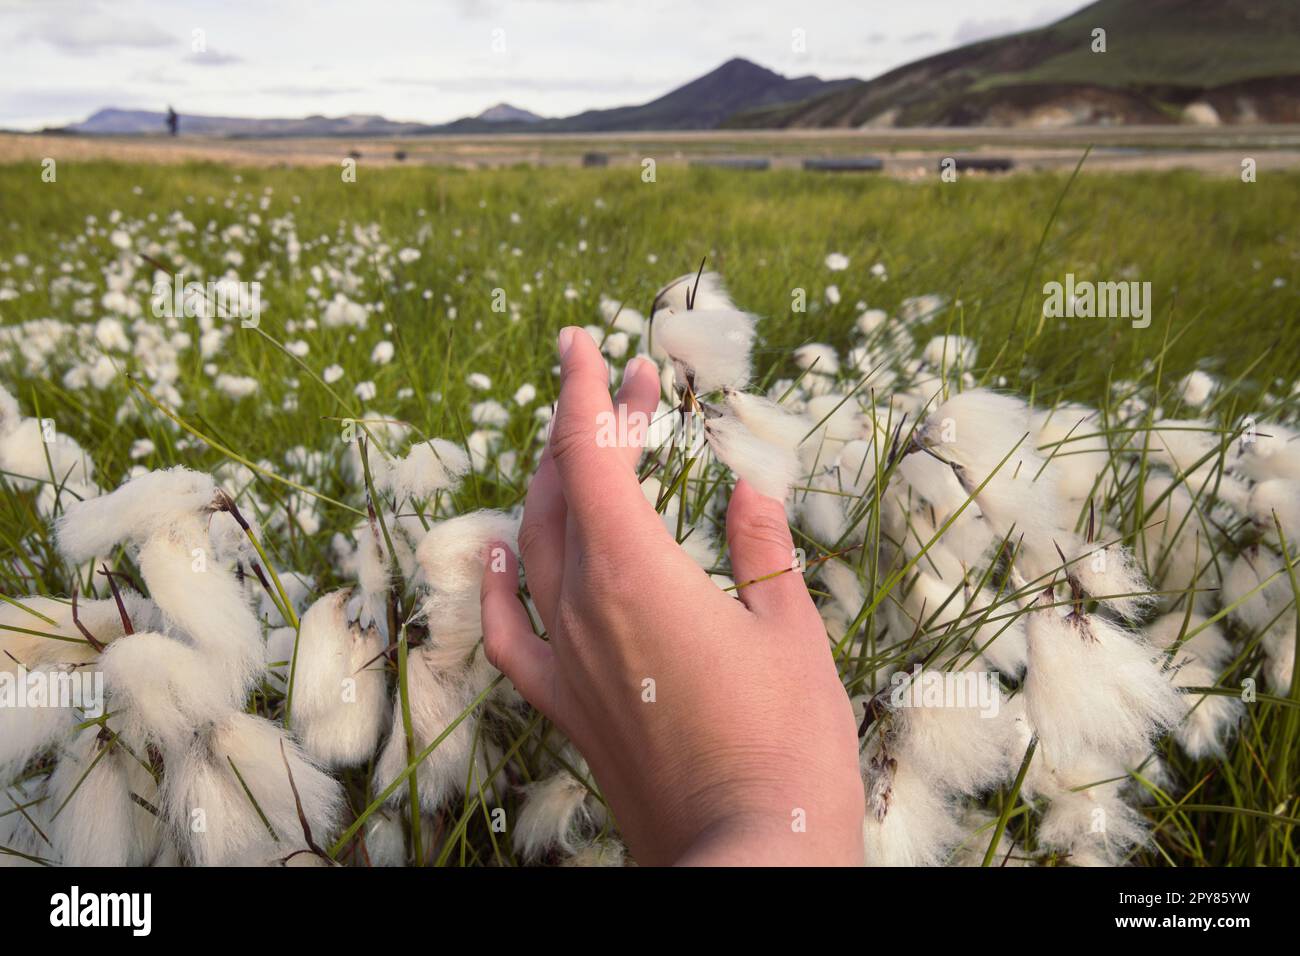 Close up woman touching cottongrass in field concept photo Stock Photo